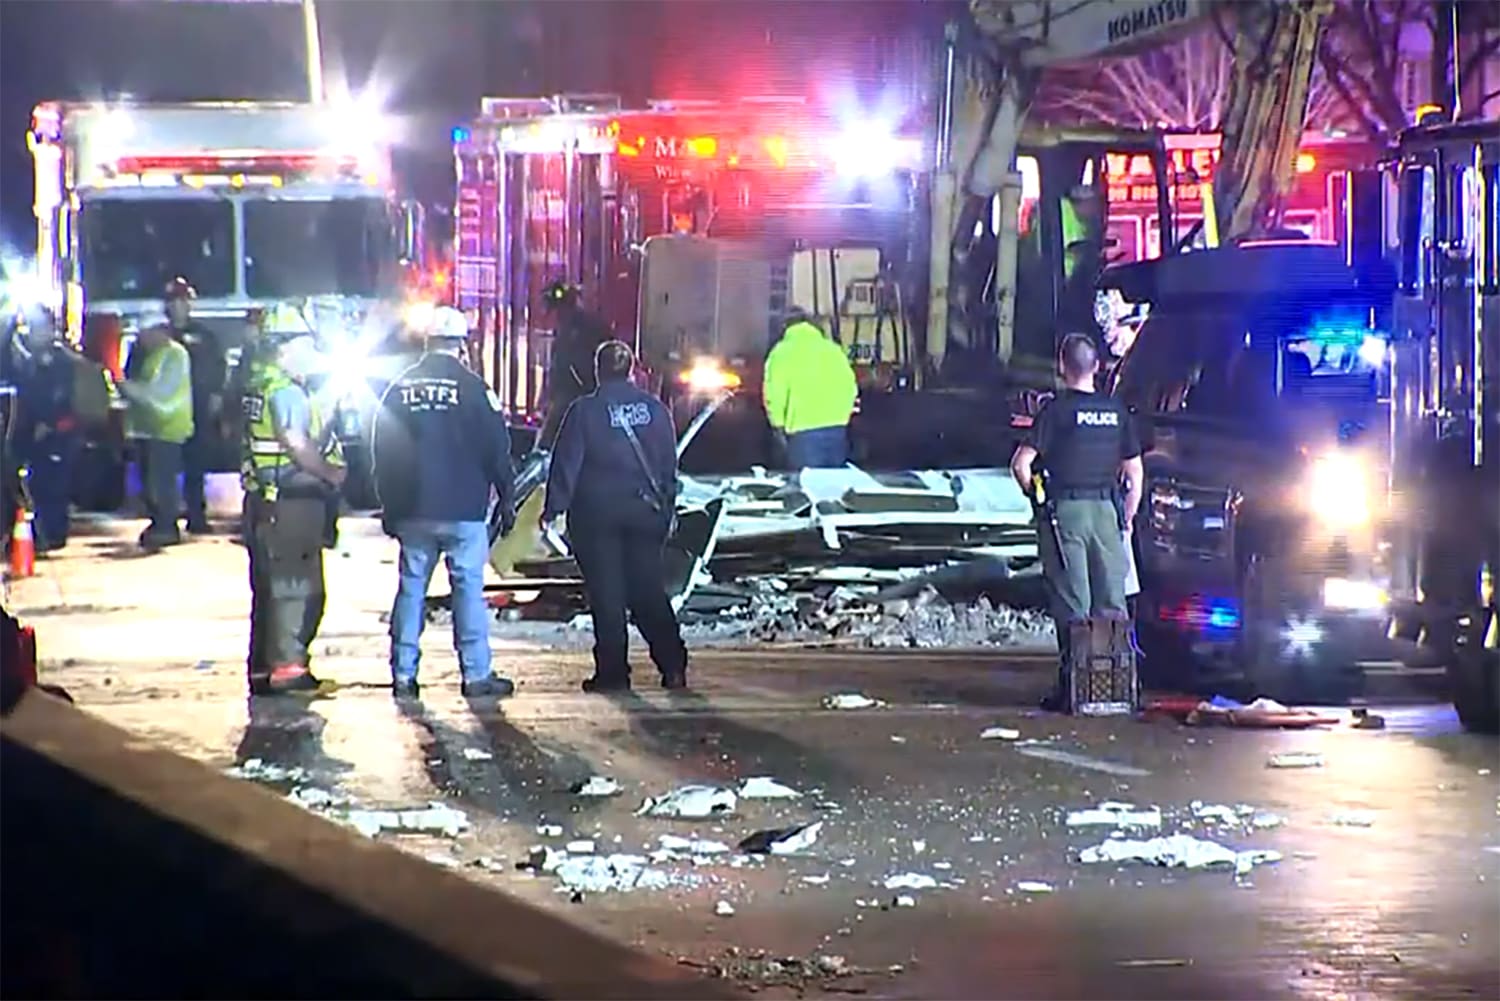 At least 1 dead, dozens injured after concert roof collapses in Illinois